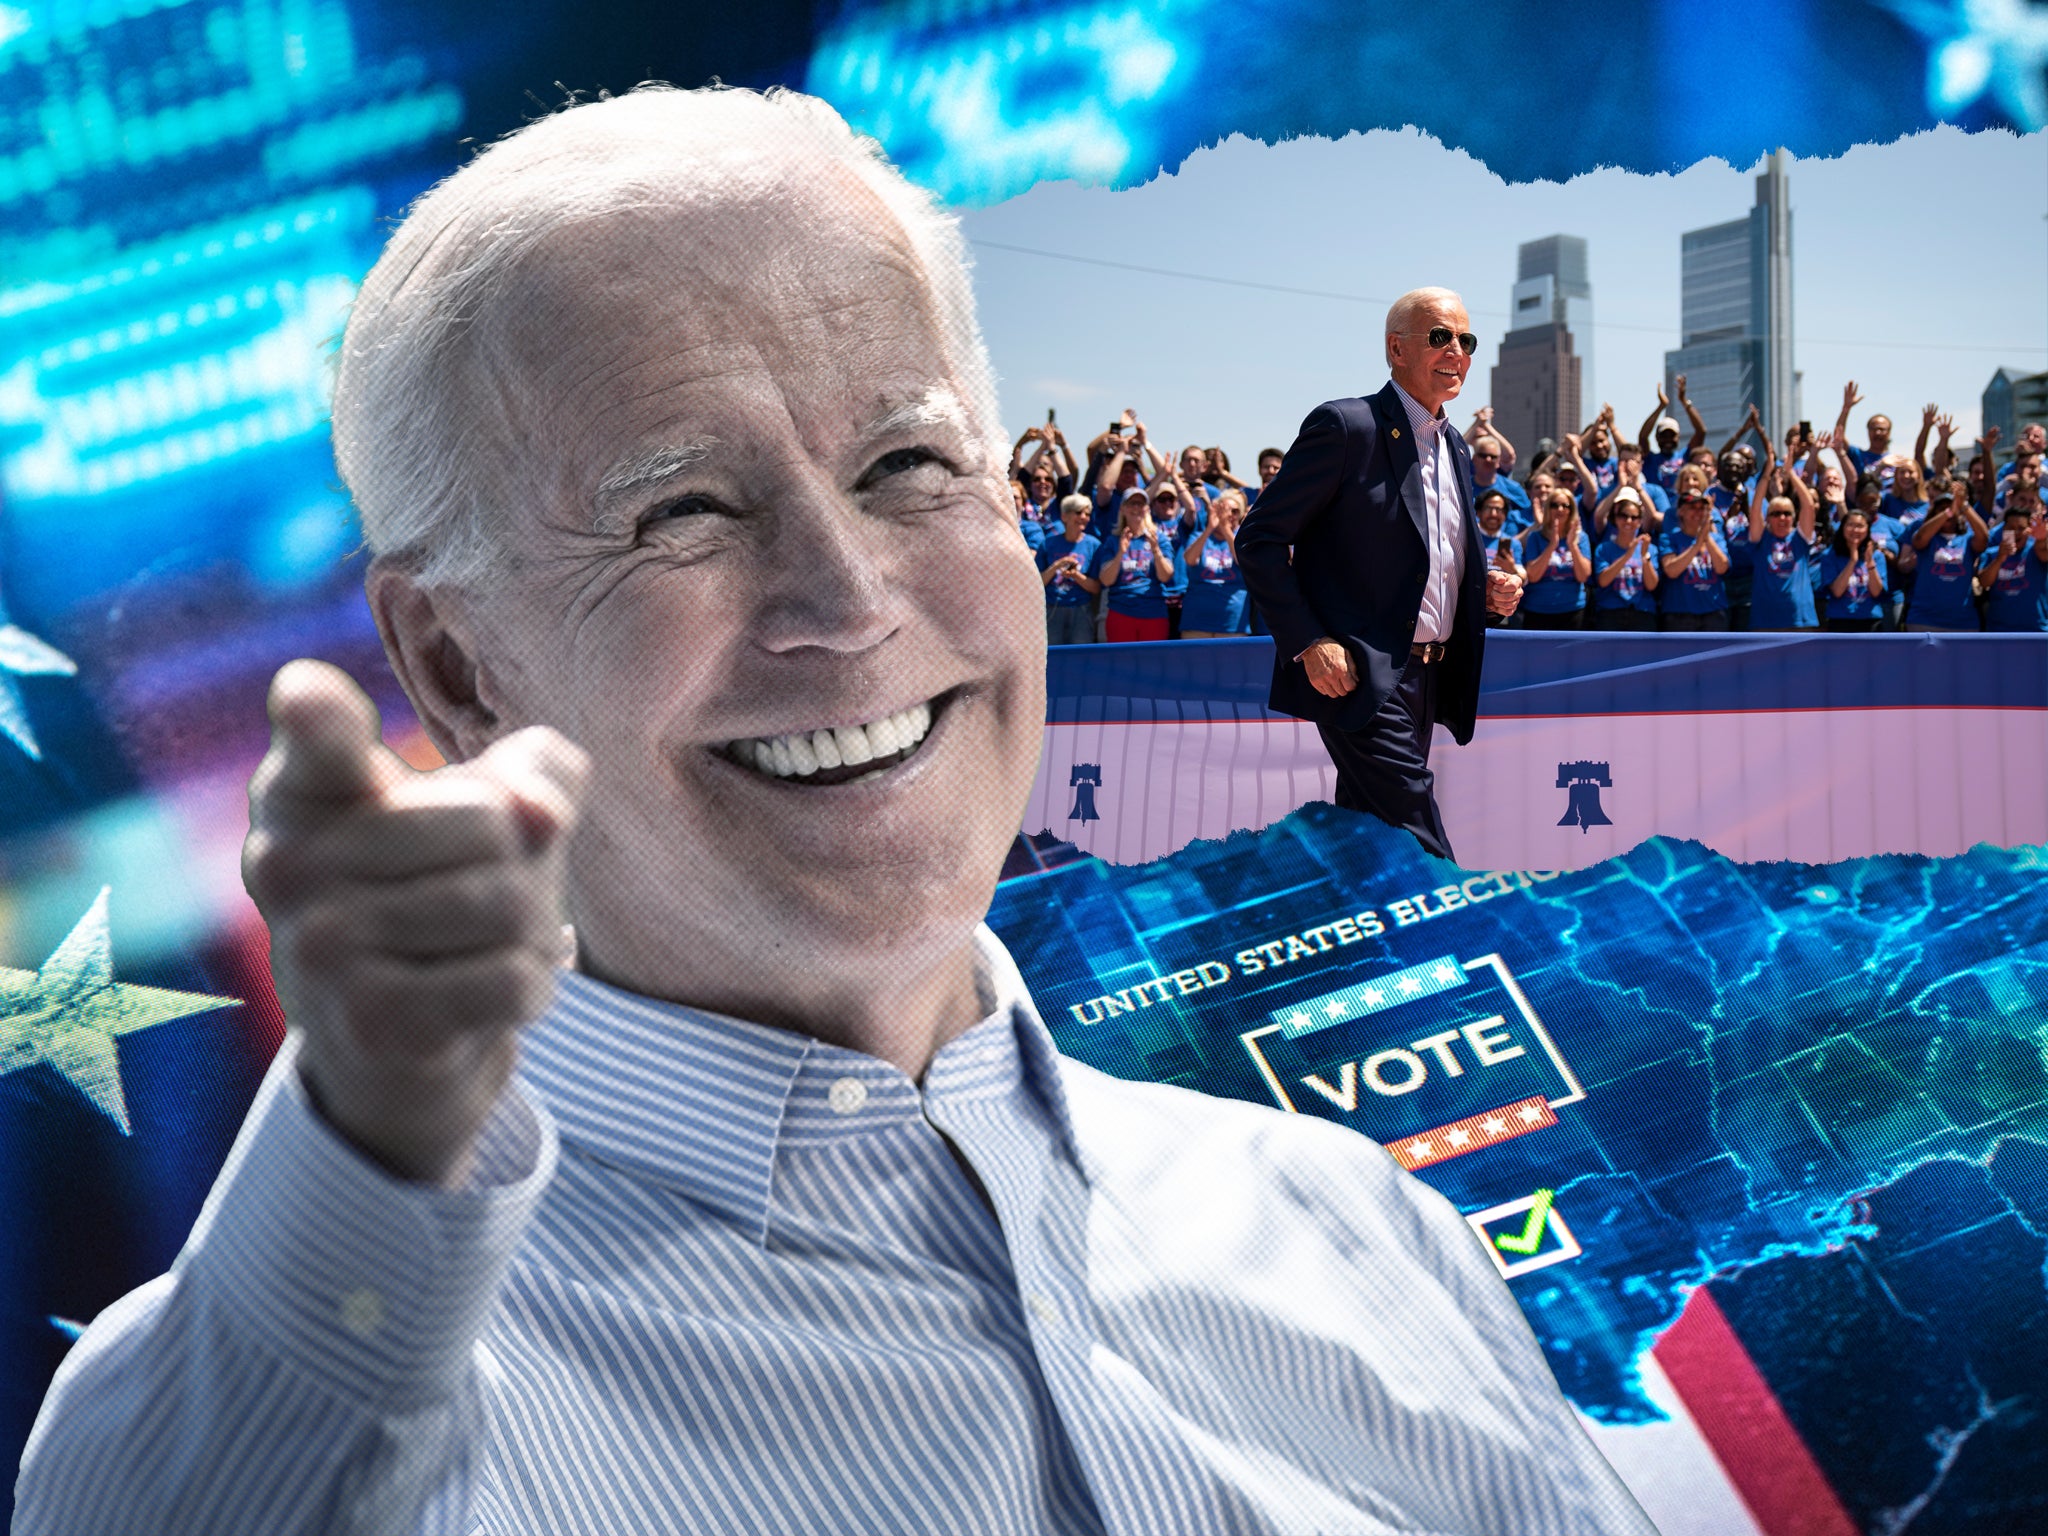 Trump’s likely emergence as the GOP frontrunner will give Biden the opportunity to remind voters why they elected him in the first place